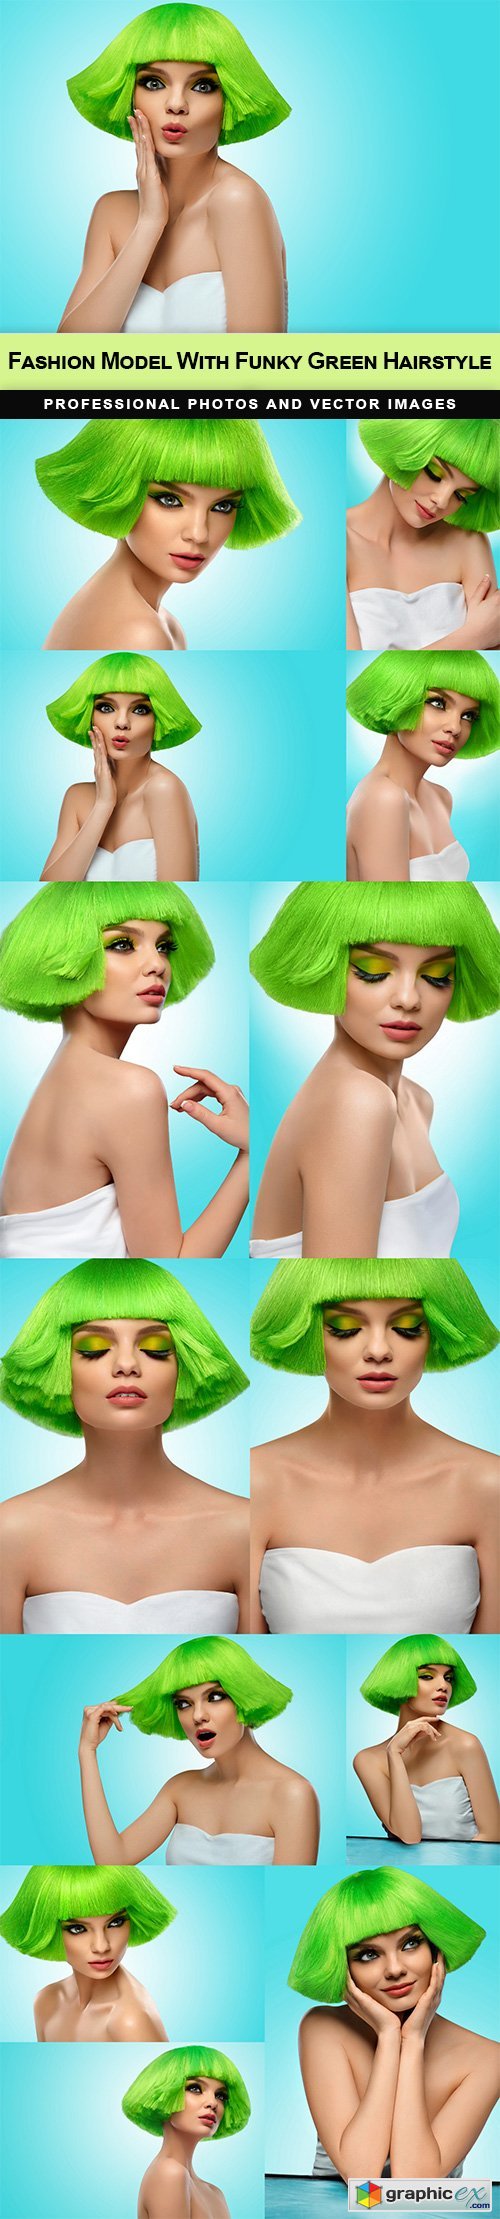 Fashion Model With Funky Green Hairstyle